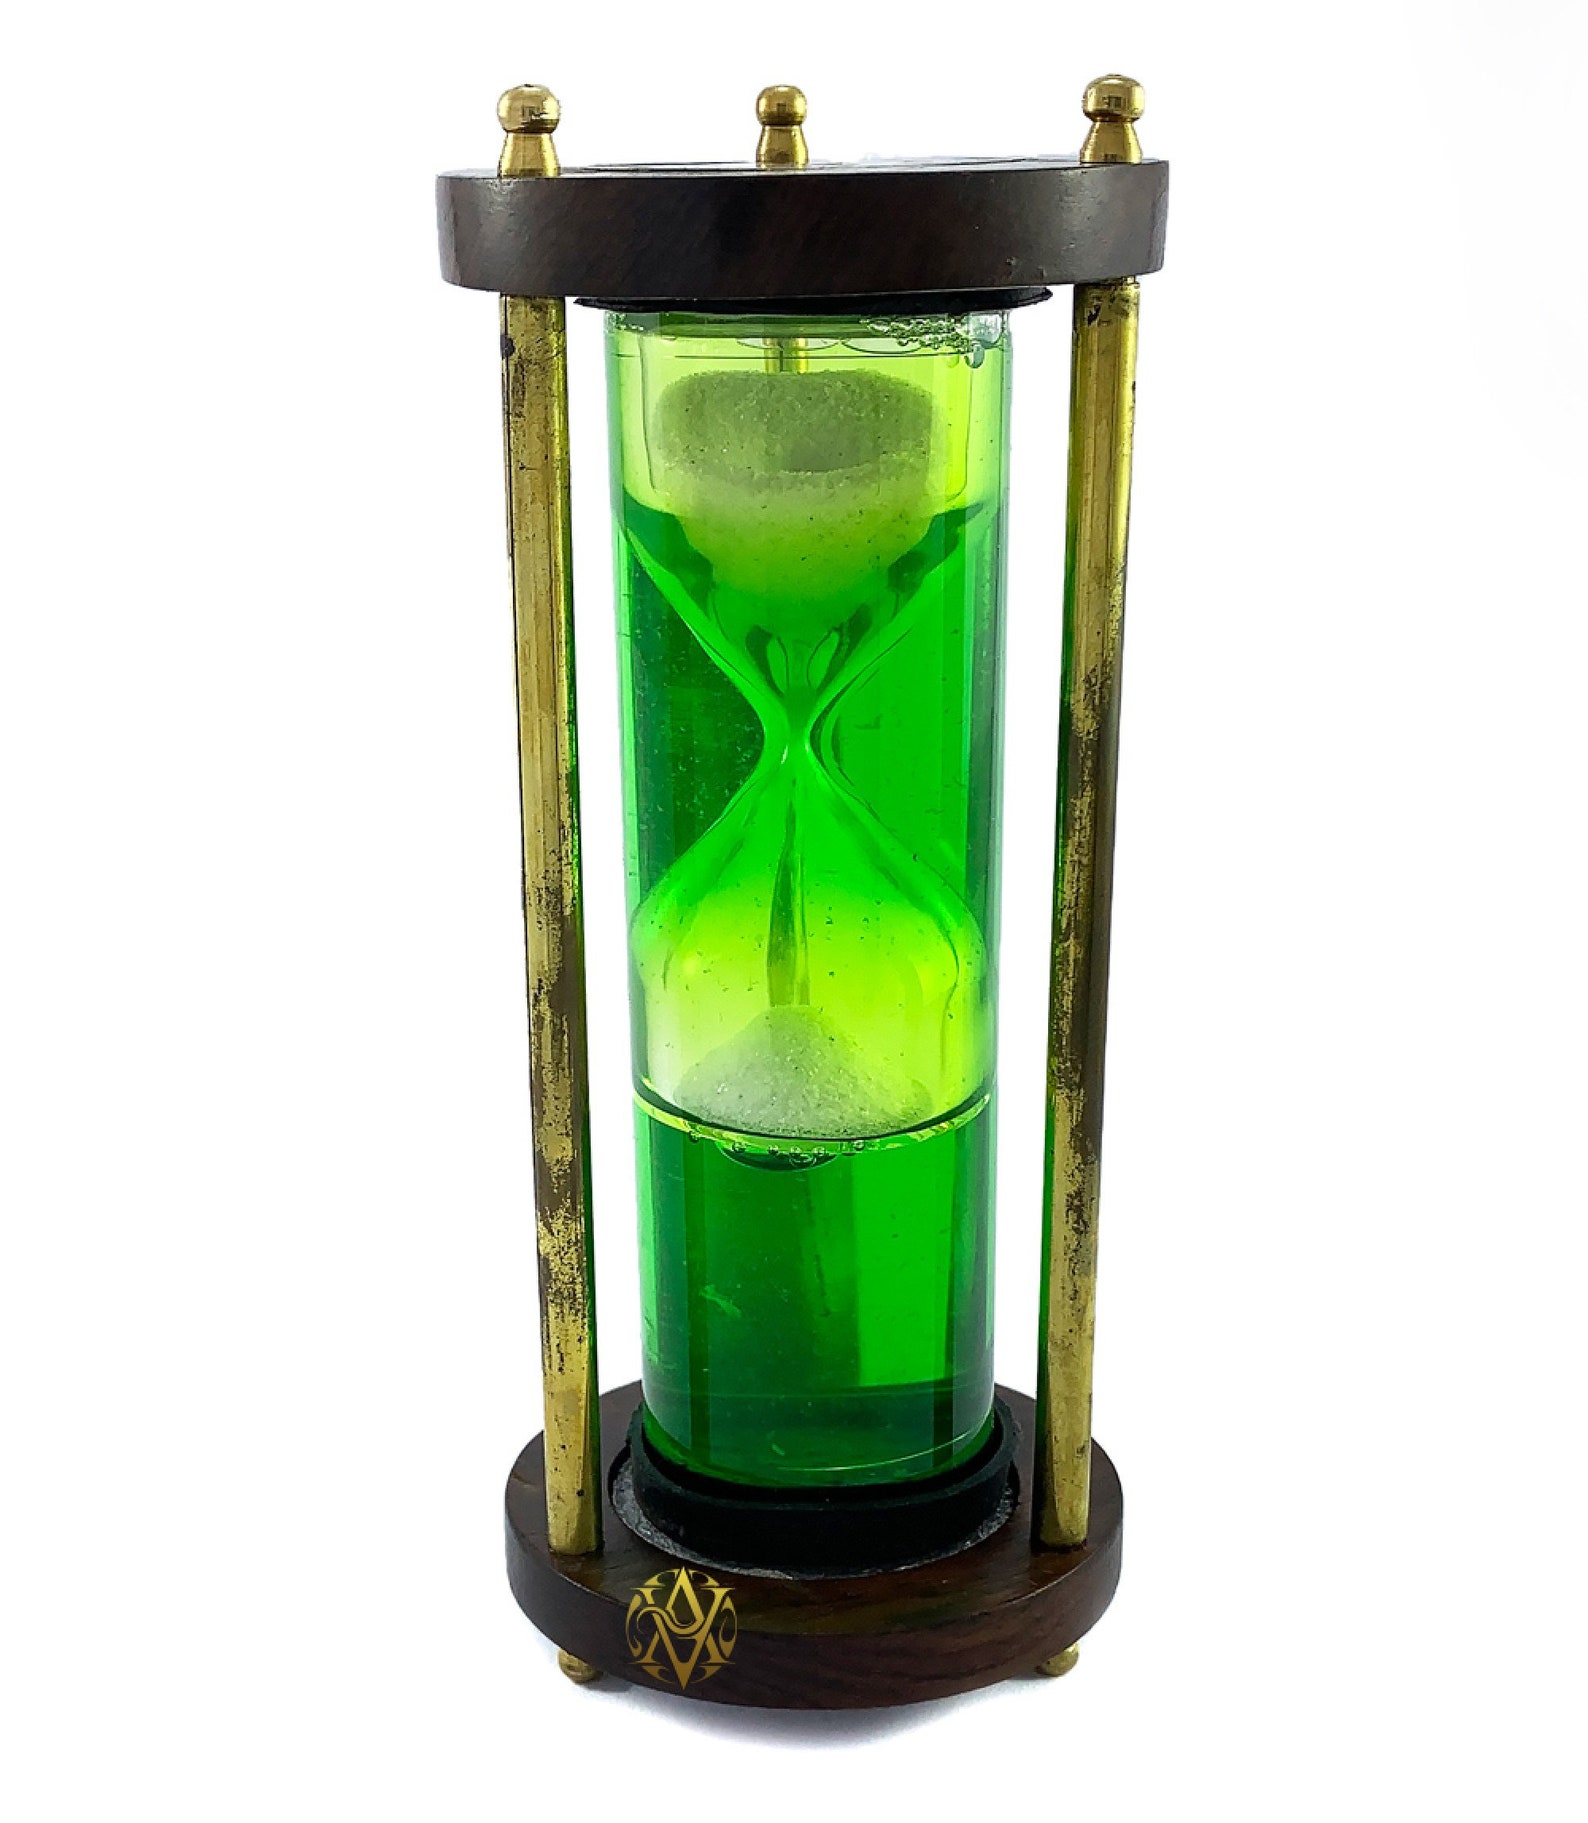 Old Sand Watch Green Liquid Timer Sand Timer Hour Glass - Etsy